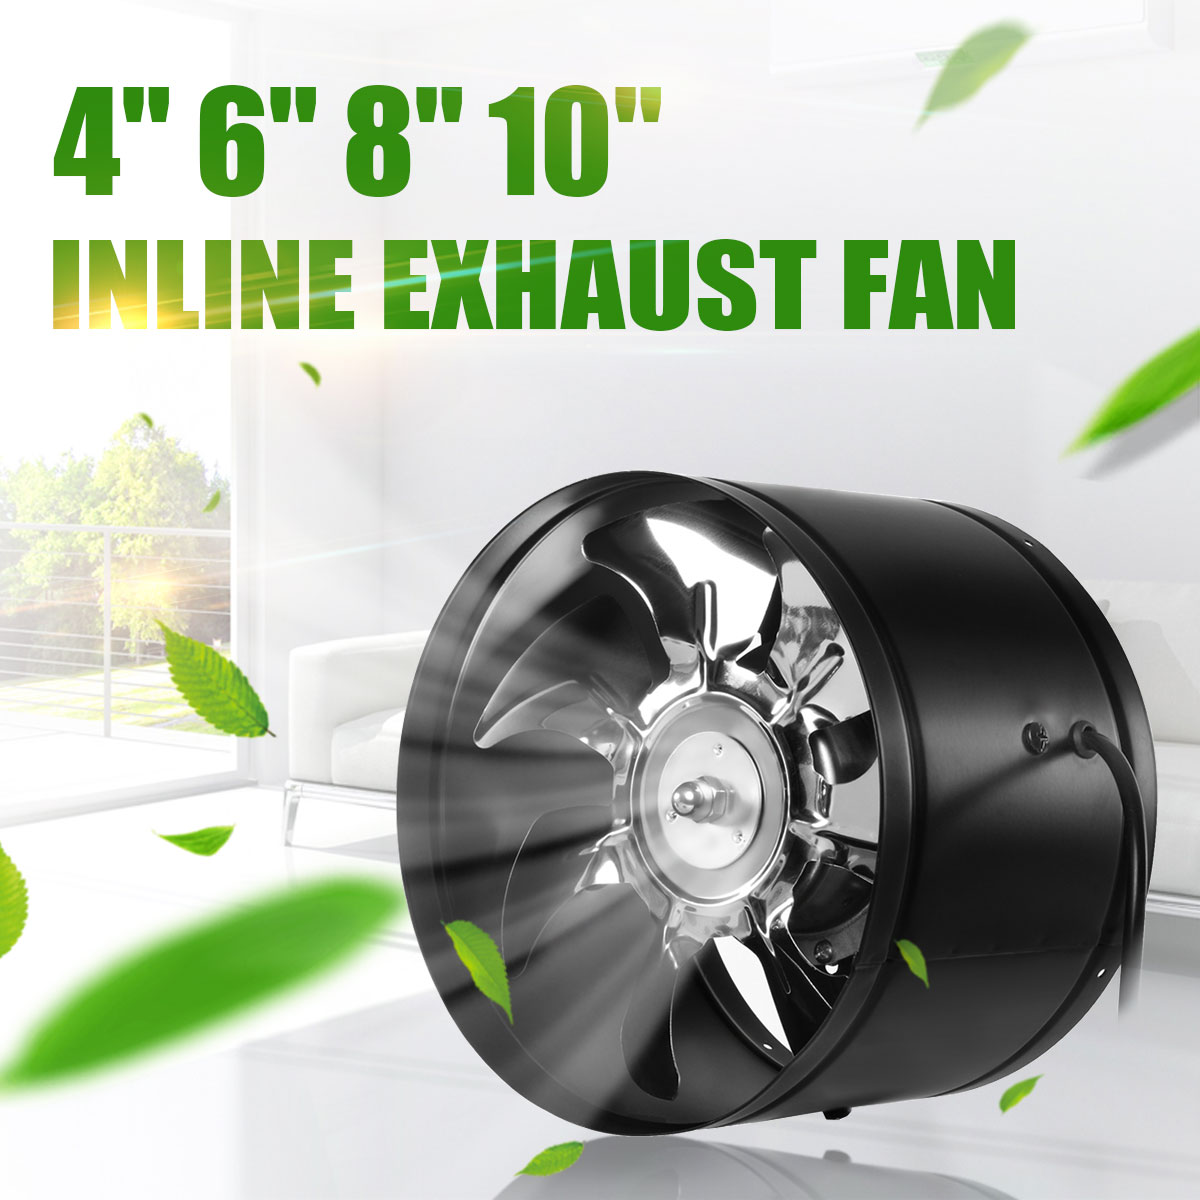 220V-46810-Inch-Inline-Duct-Fan-Booster-Exhaust-Blower-Air-Cooling-Vent-Black-1353811-1